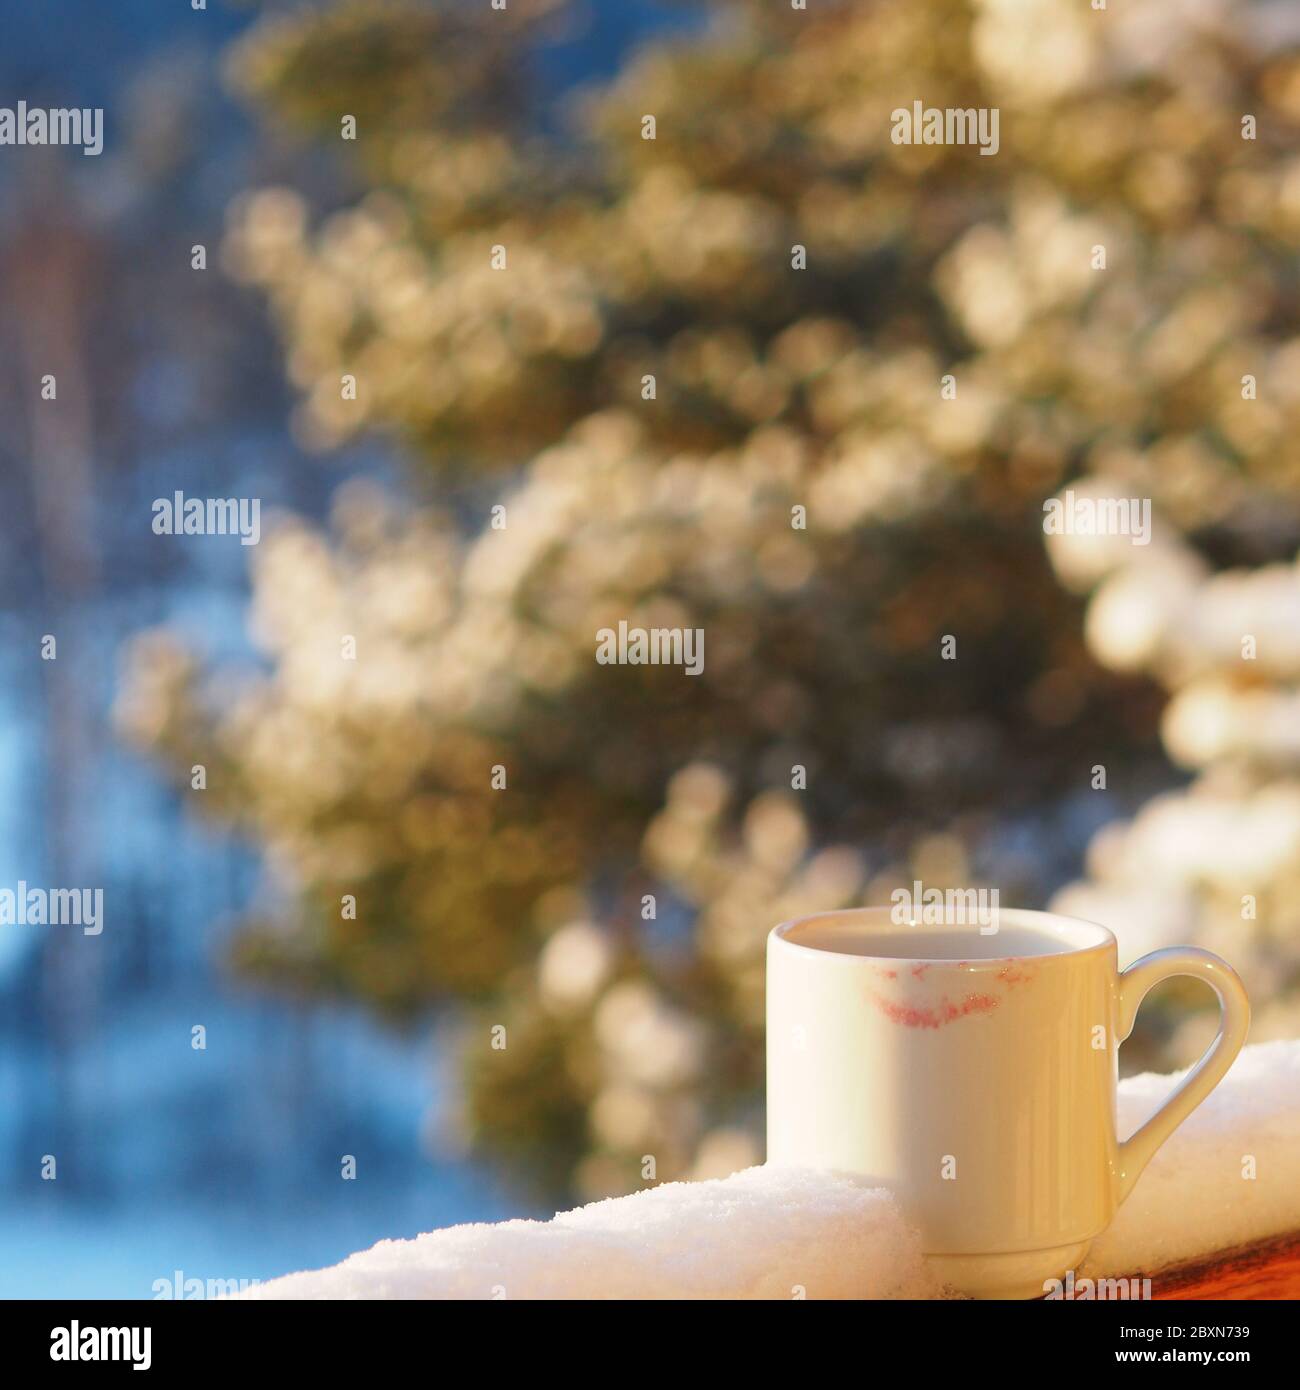 https://c8.alamy.com/comp/2BXN739/snow-covered-landscape-mug-at-snow-in-the-morning-cup-with-morning-coffee-on-a-background-of-a-winter-landscape-2BXN739.jpg